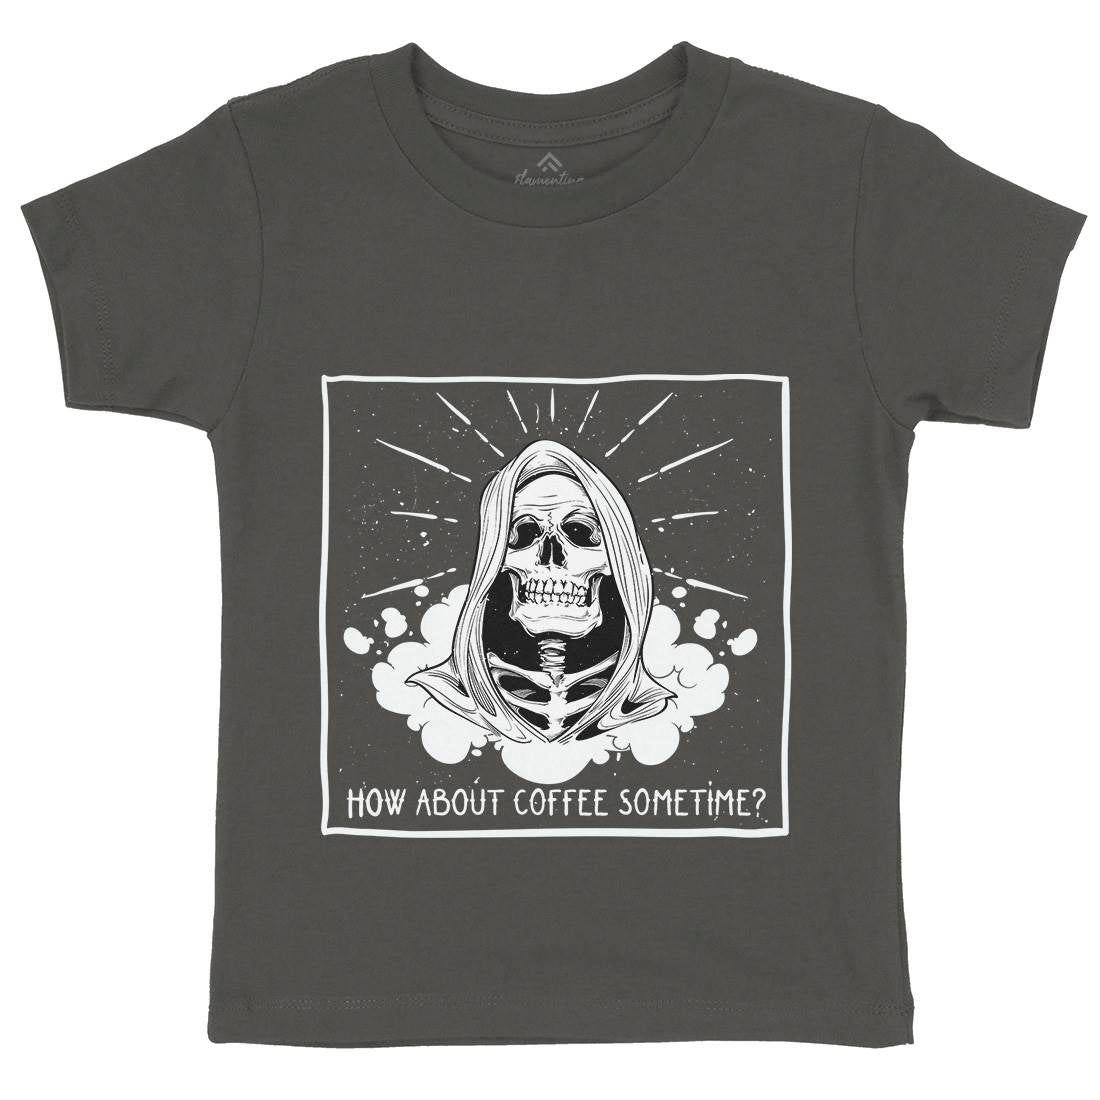 How About Coffee Kids Organic Crew Neck T-Shirt Funny D463